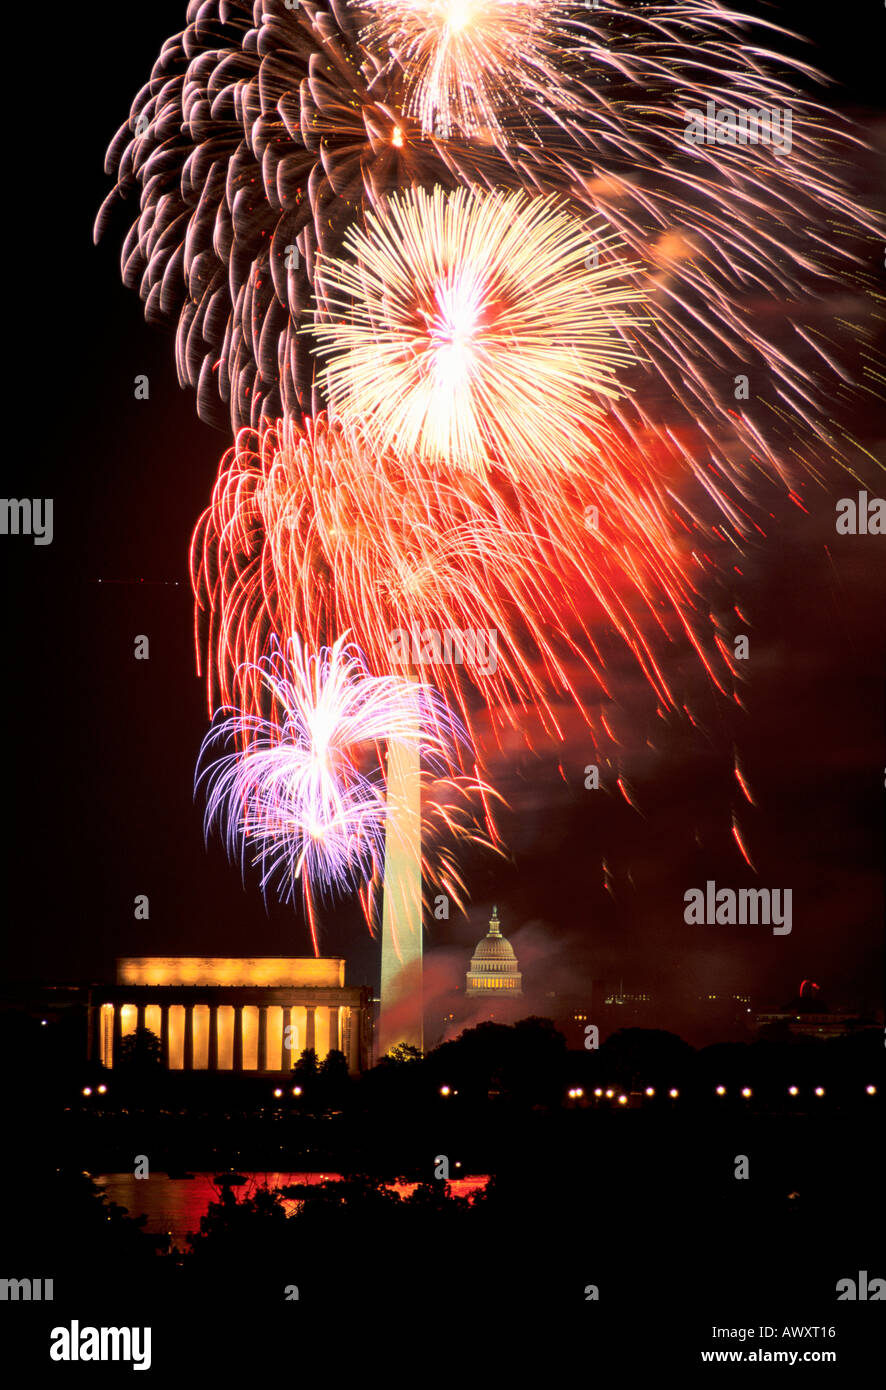 Washington, D.C., USA,  July 4th fireworks over The Mall, Capitol, Washington Monument and Lincoln Memorial Stock Photo